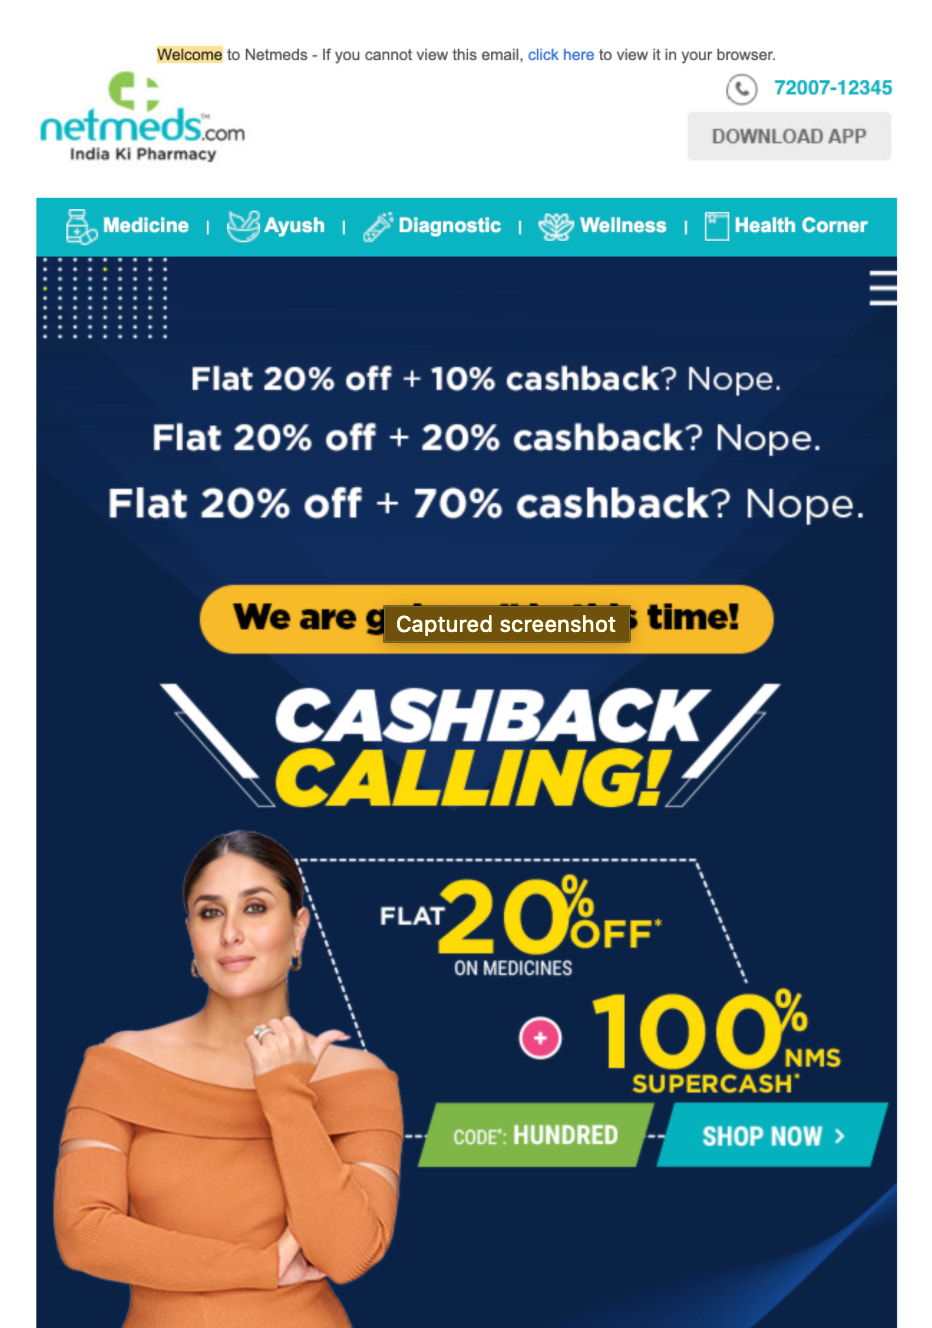 netmeds ecommerce welcome emails